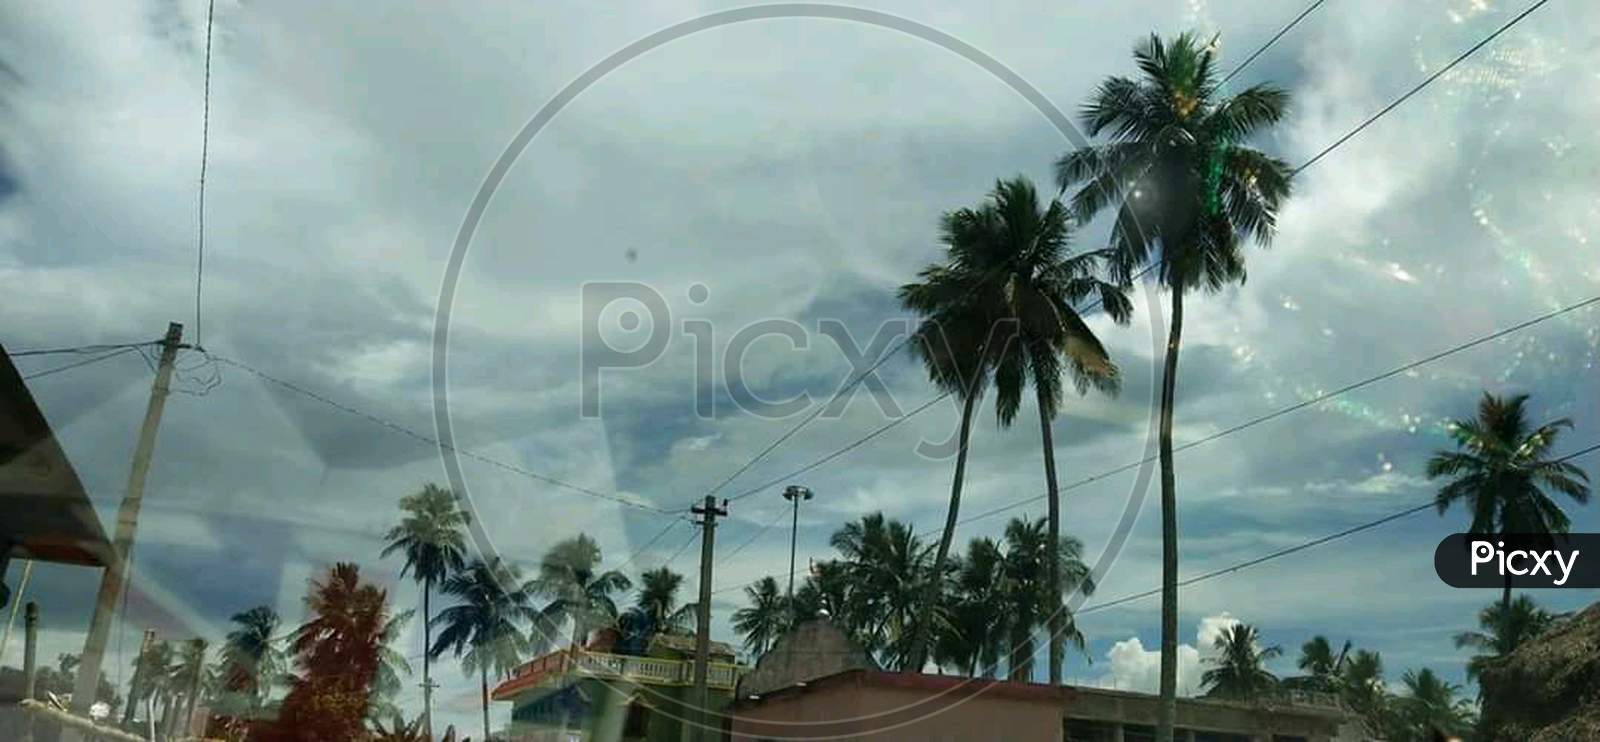 Sky and coconut plant photograph